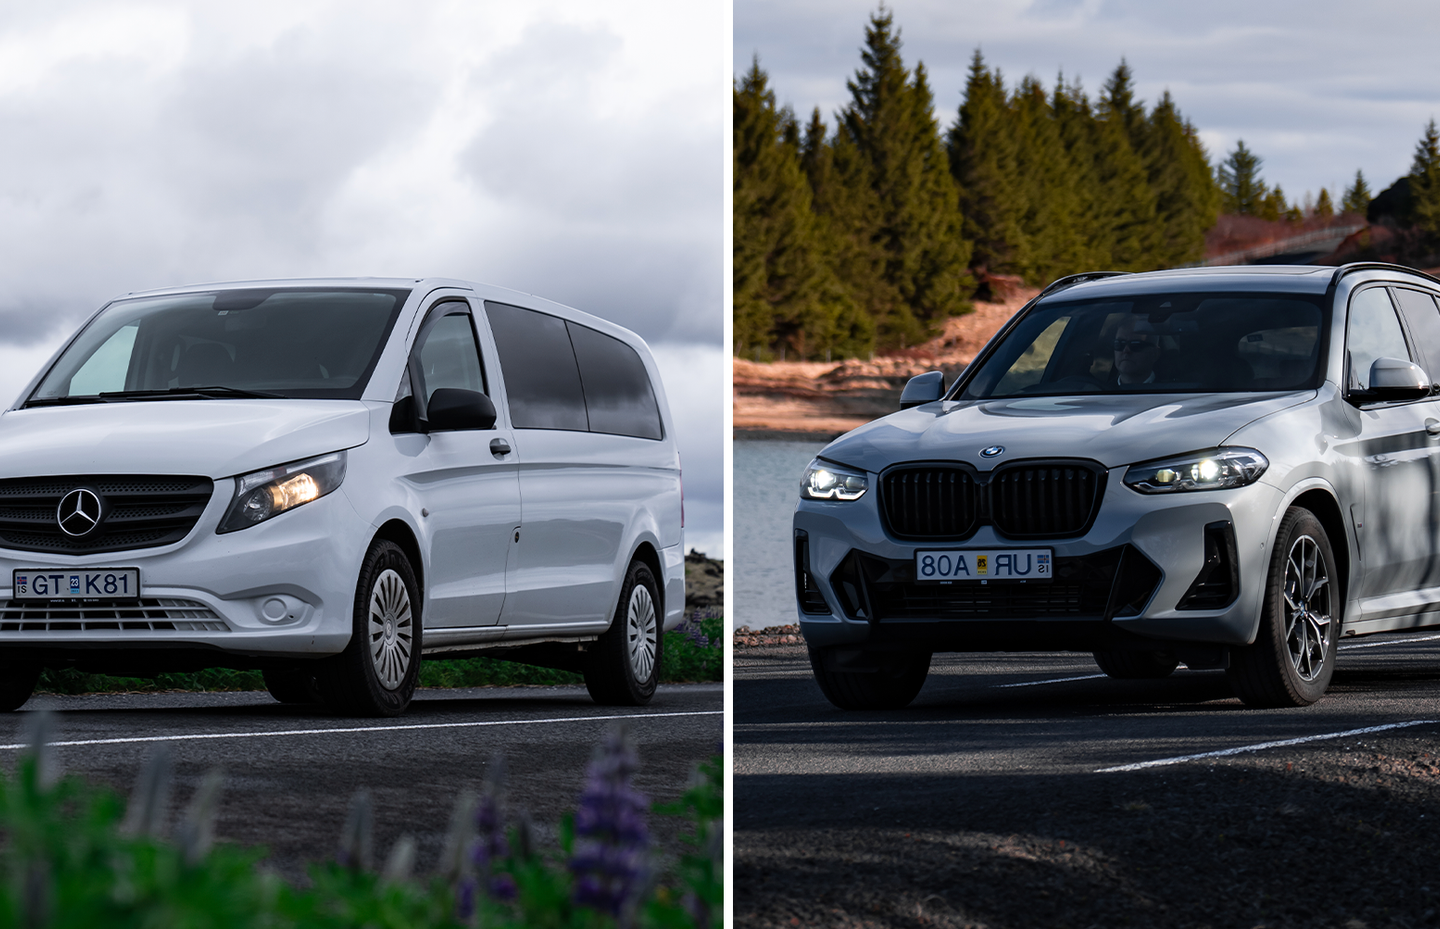 A minivan rental car on the left and a SUV rental car on the right in Iceland.